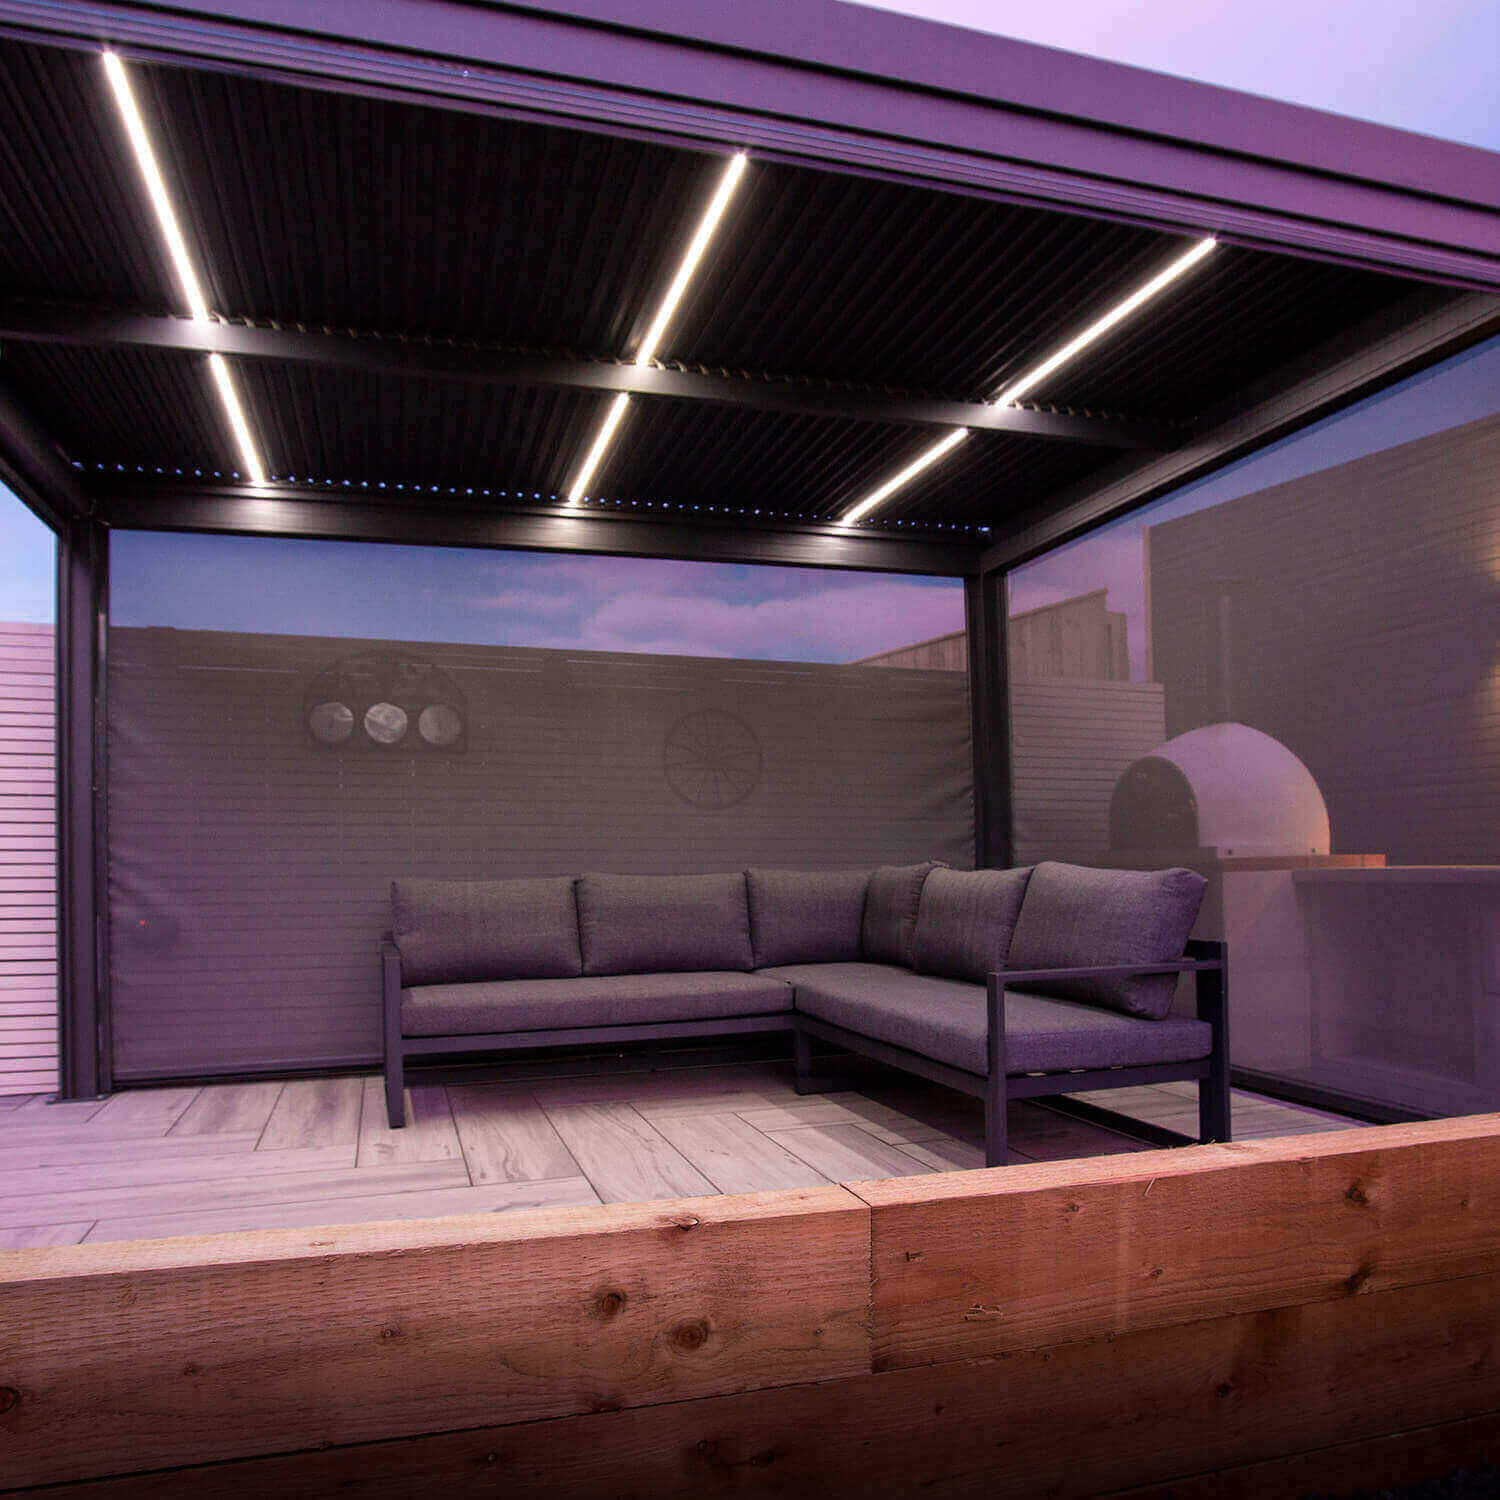 Side view of the motorised louvred roof with white LED lights turned on. Two additional privacy screens attached to the grey aluminium pergola.